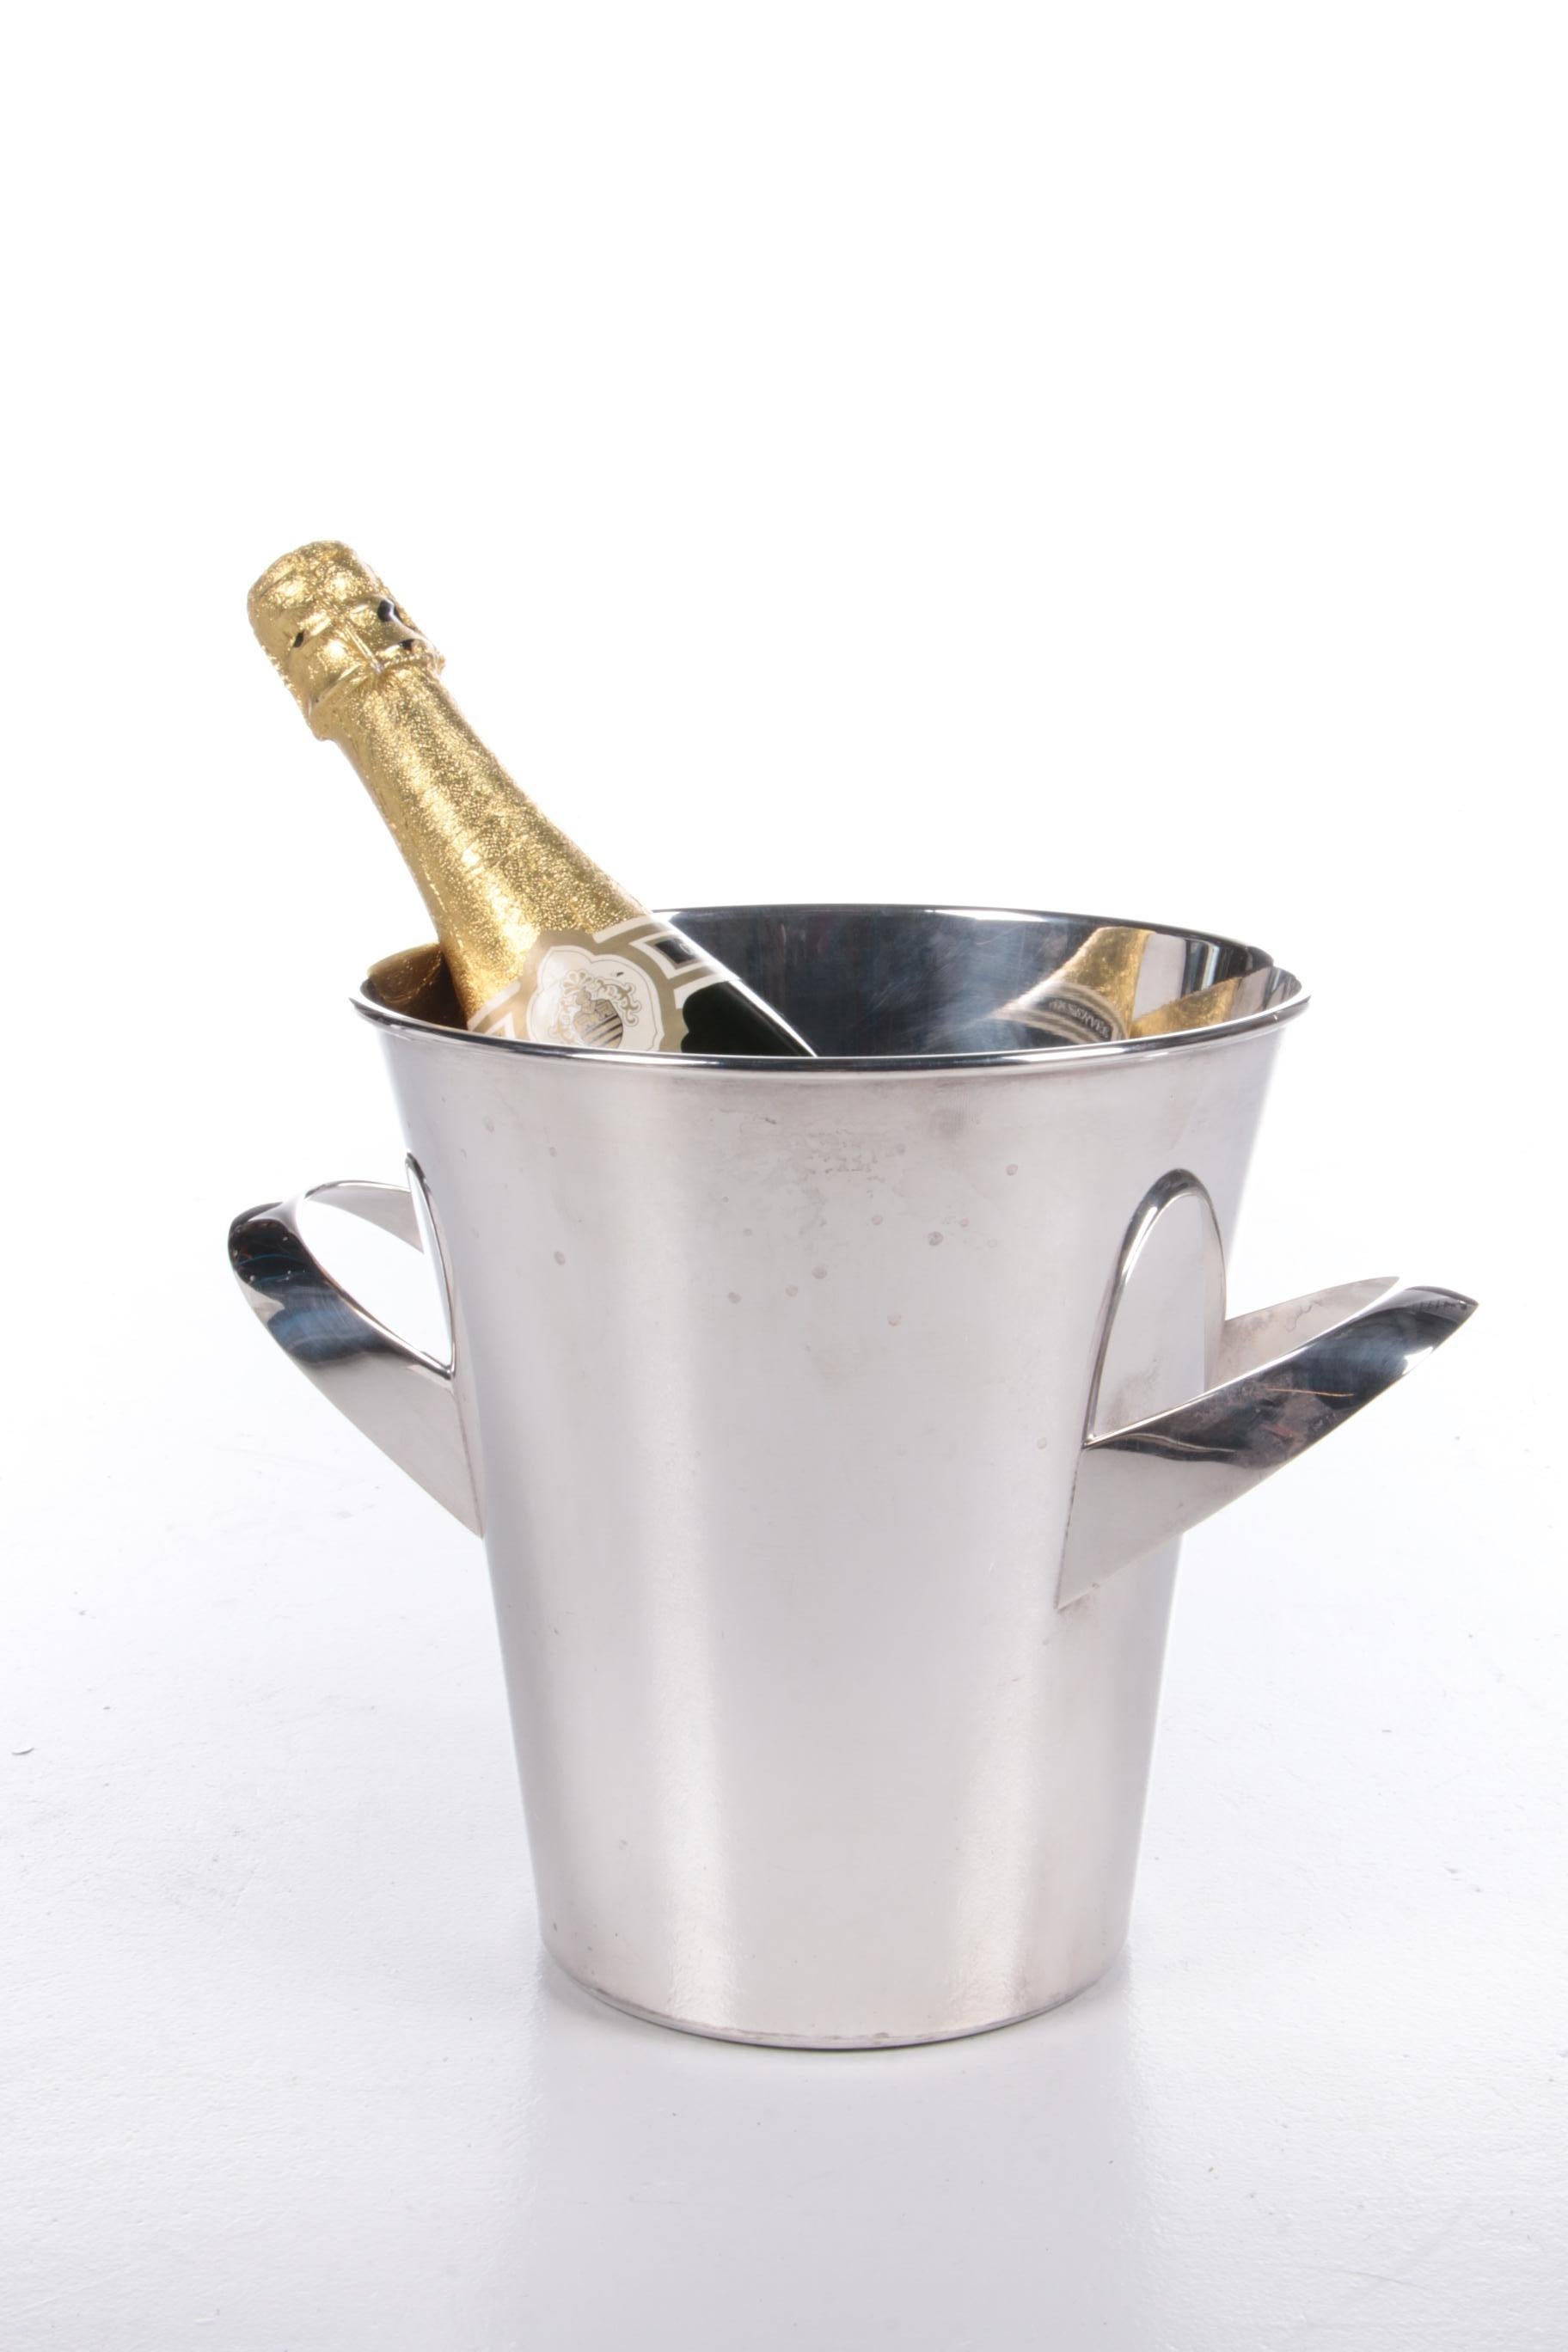 This beautiful silver plated wine champagne cooler is a real elegant classic.

The design is by Kurt Mayer from 1953 for the company WMF.

A unique item to have at home and fits into any interior!

The cooler is of very high quality.1 Sustainable: